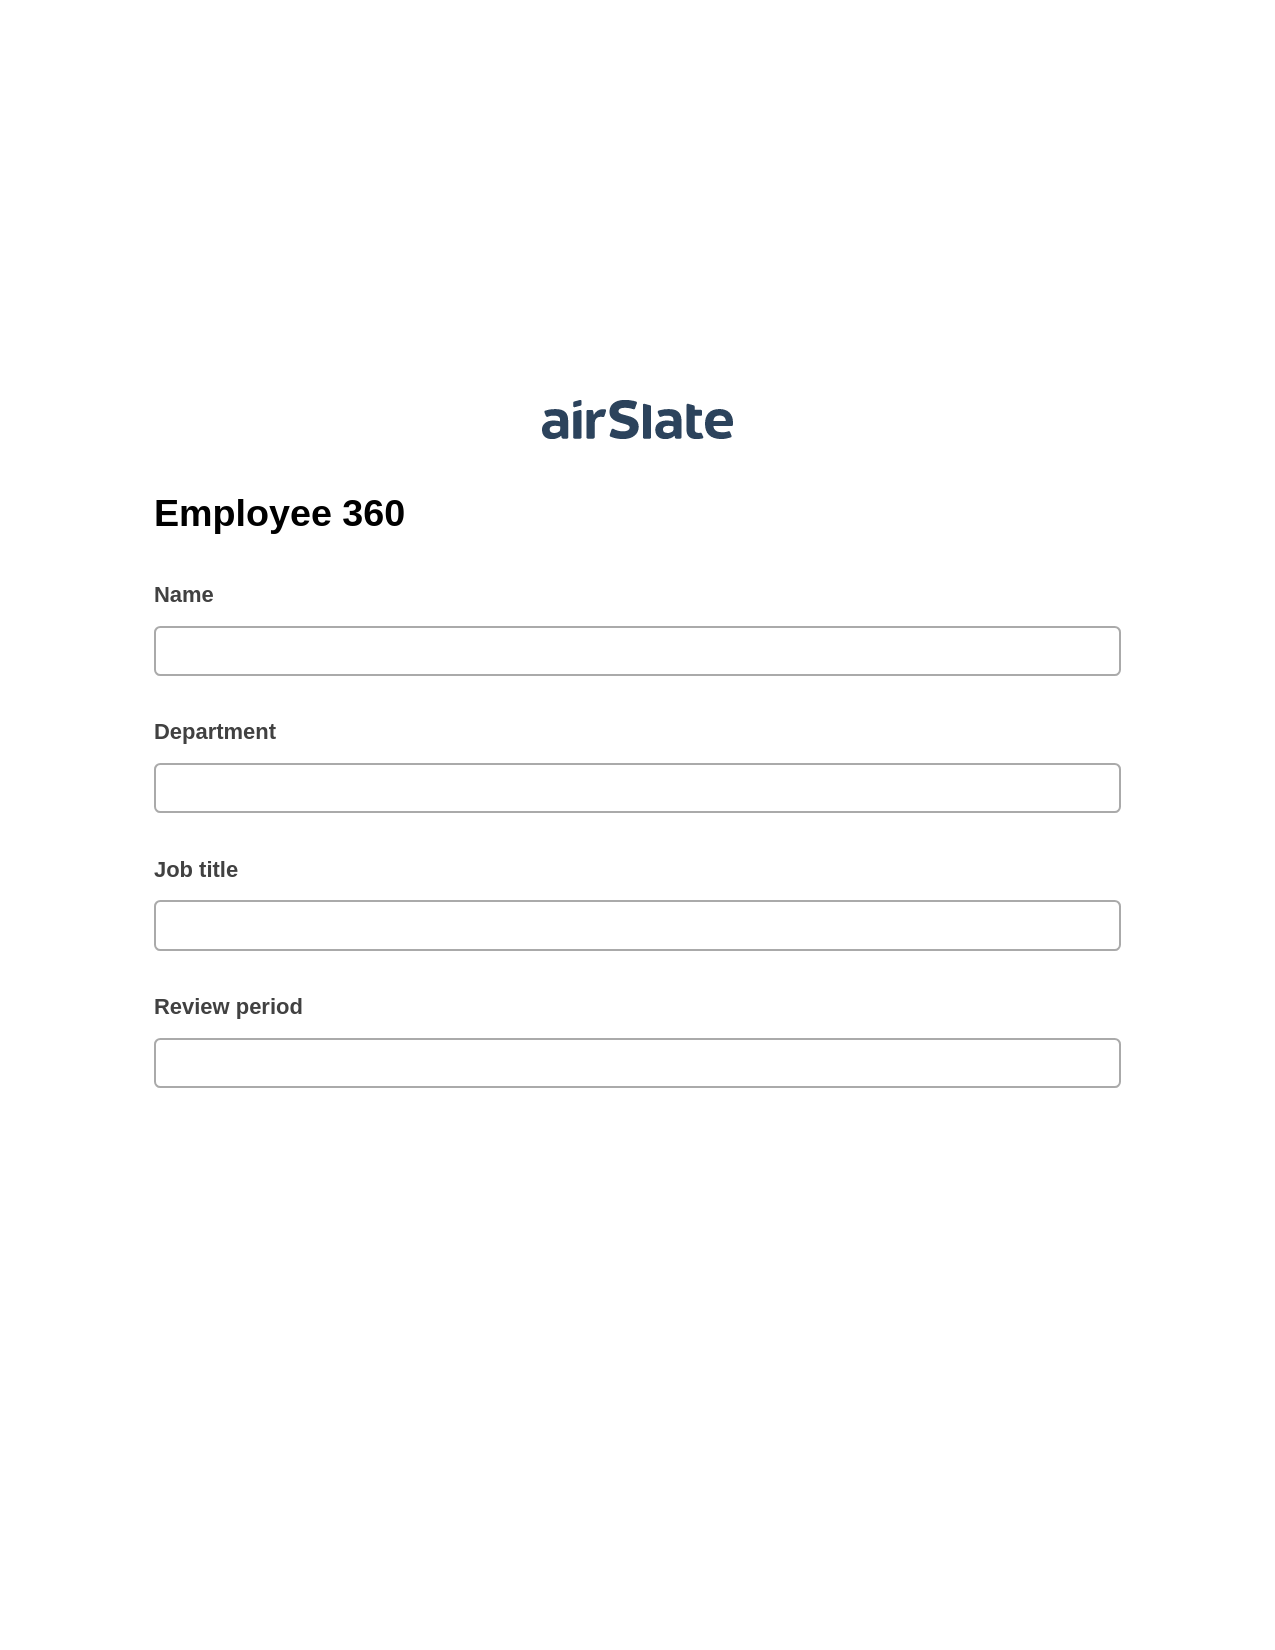 Employee 360 Pre-fill from MS Dynamics 365 Records, Send Mailchimp Campaign Bot, Export to NetSuite Bot